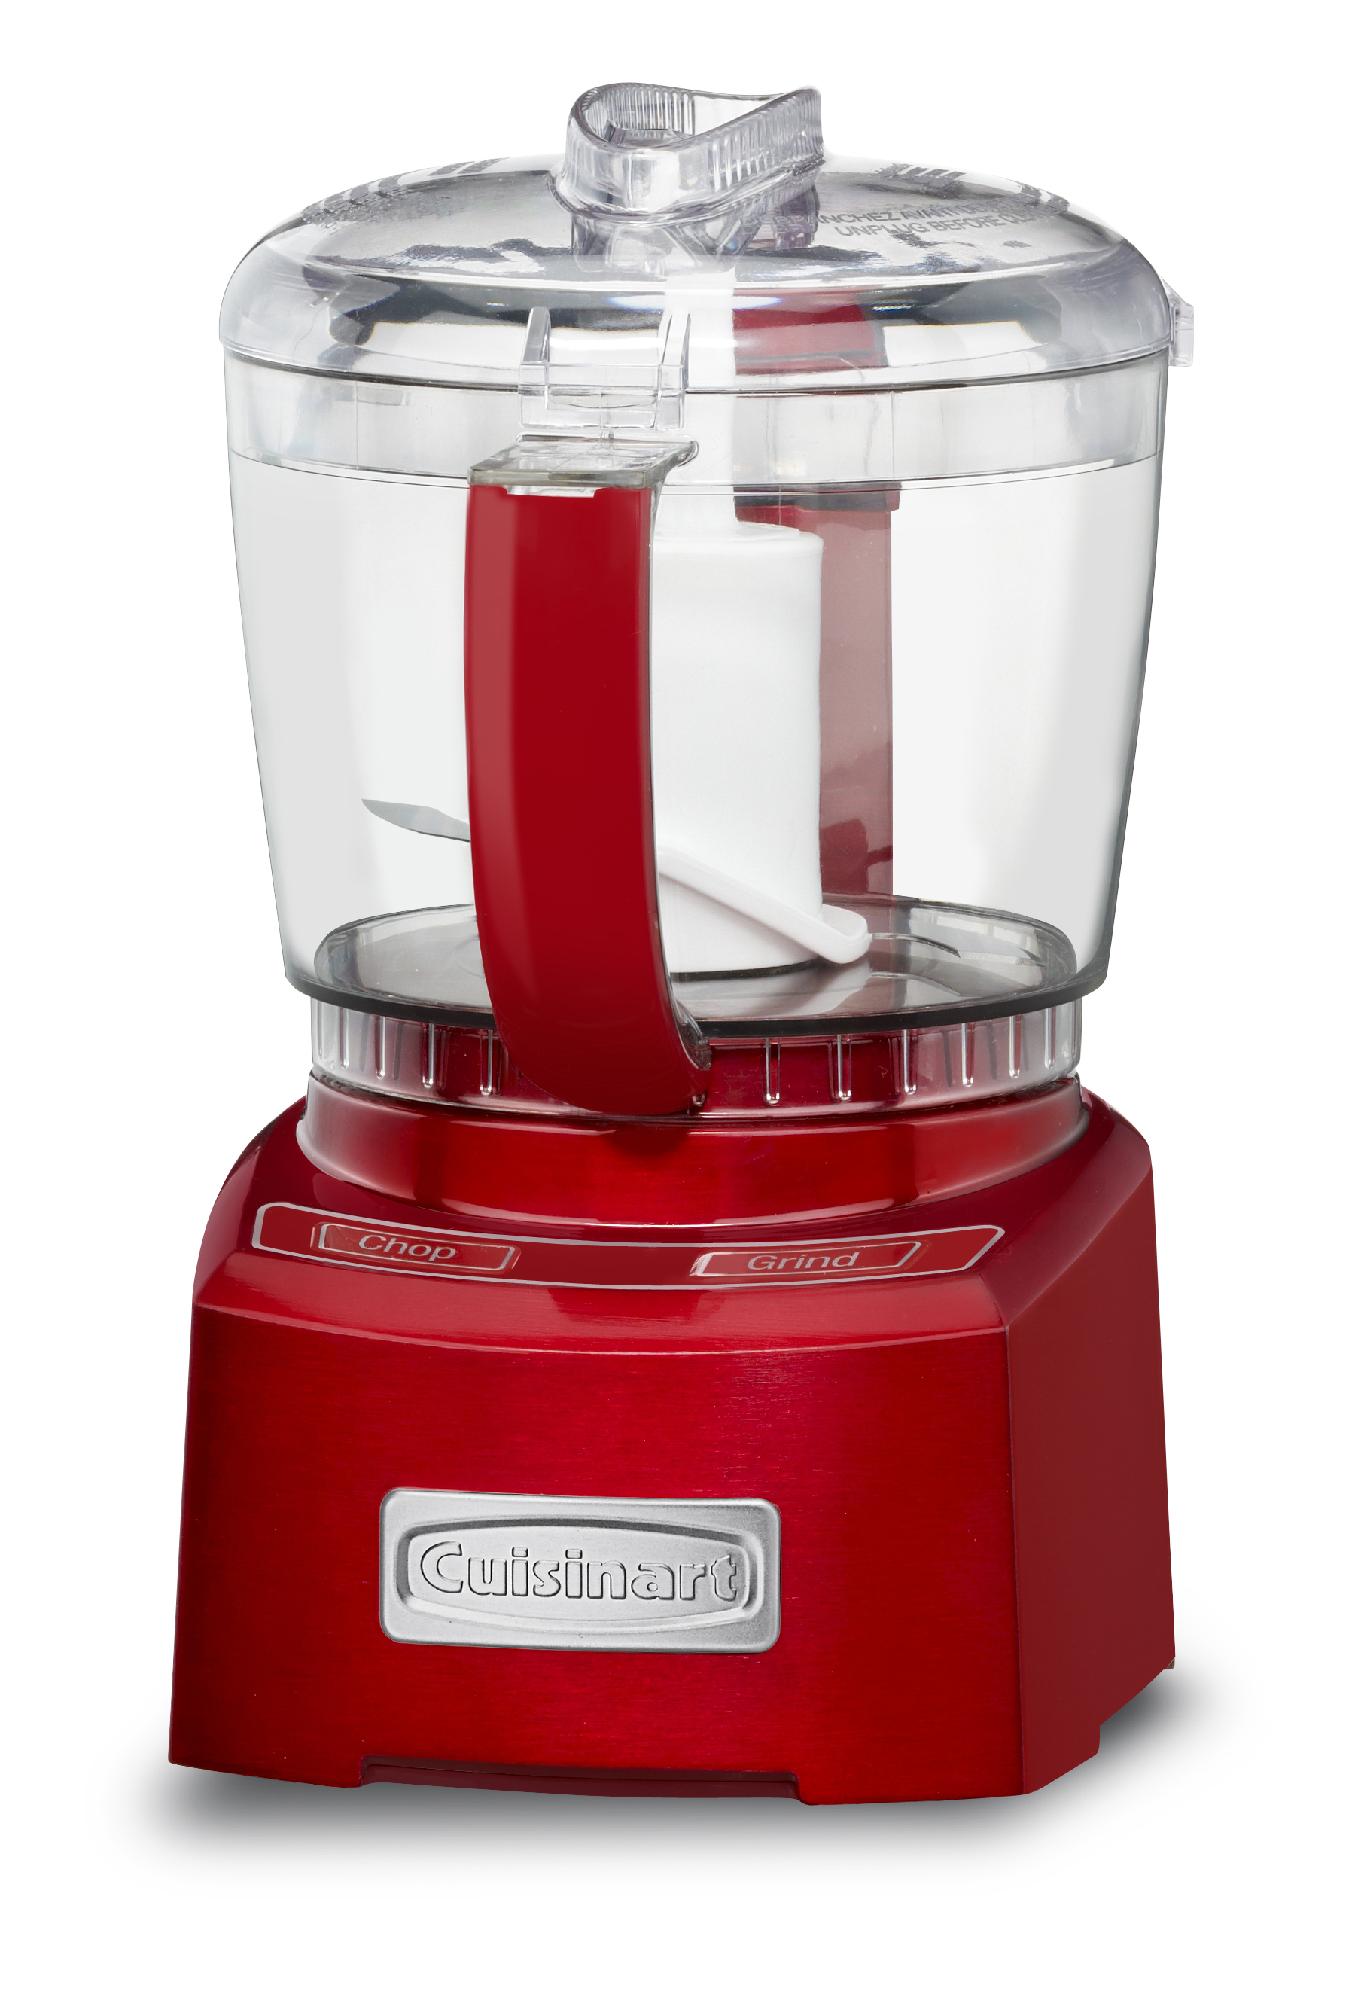 Cuisinart CH-4MR Elite Collection 4-Cup Chopper/Grinder, Metallic Red